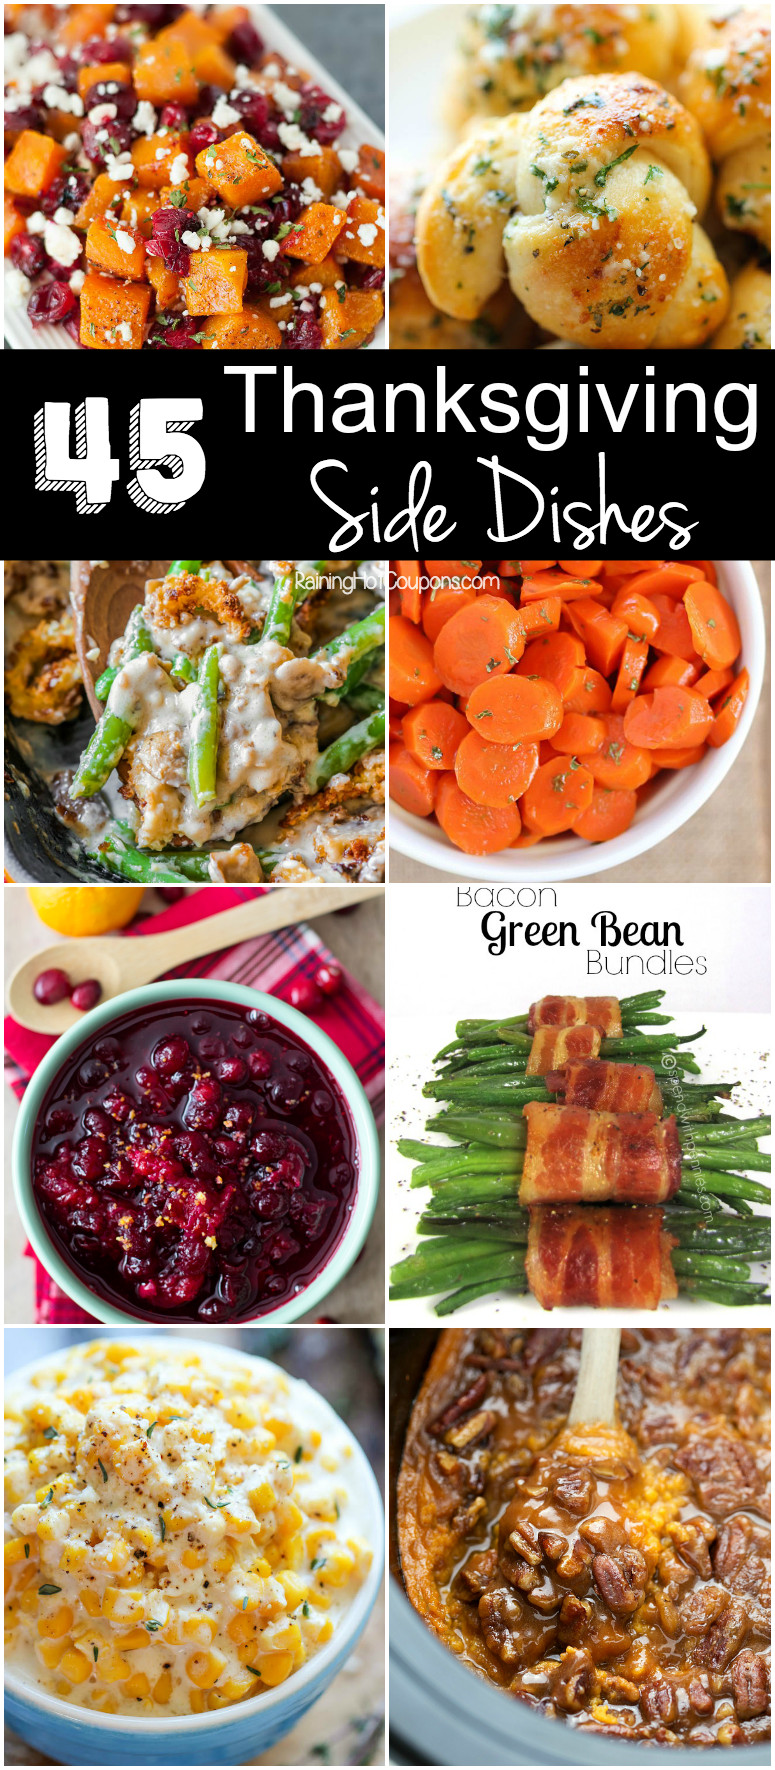 35 Of the Best Ideas for Dinner Sides Ideas - Best Recipes Ideas and